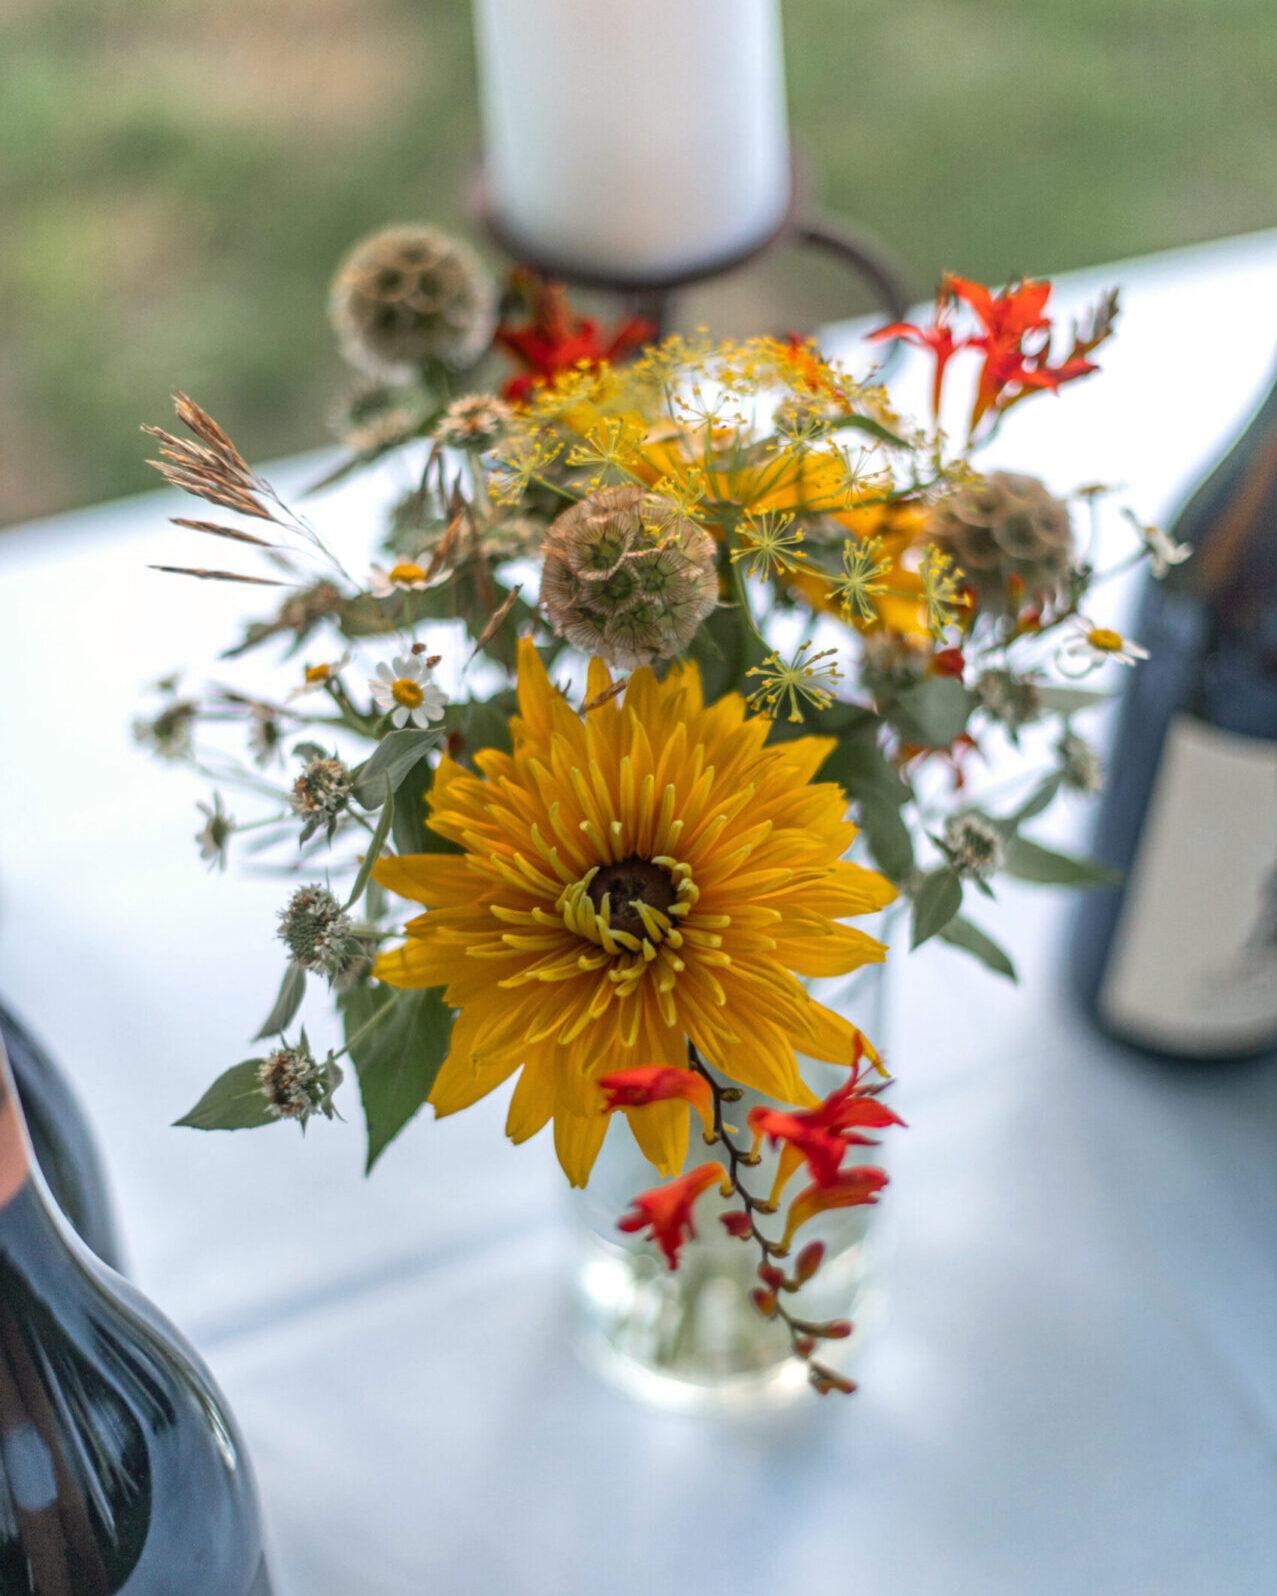 Bouquet of Flowers on Catering Table at Wedding Private event venue in the Catskills, NY. Event space available for weddings and special occasions.